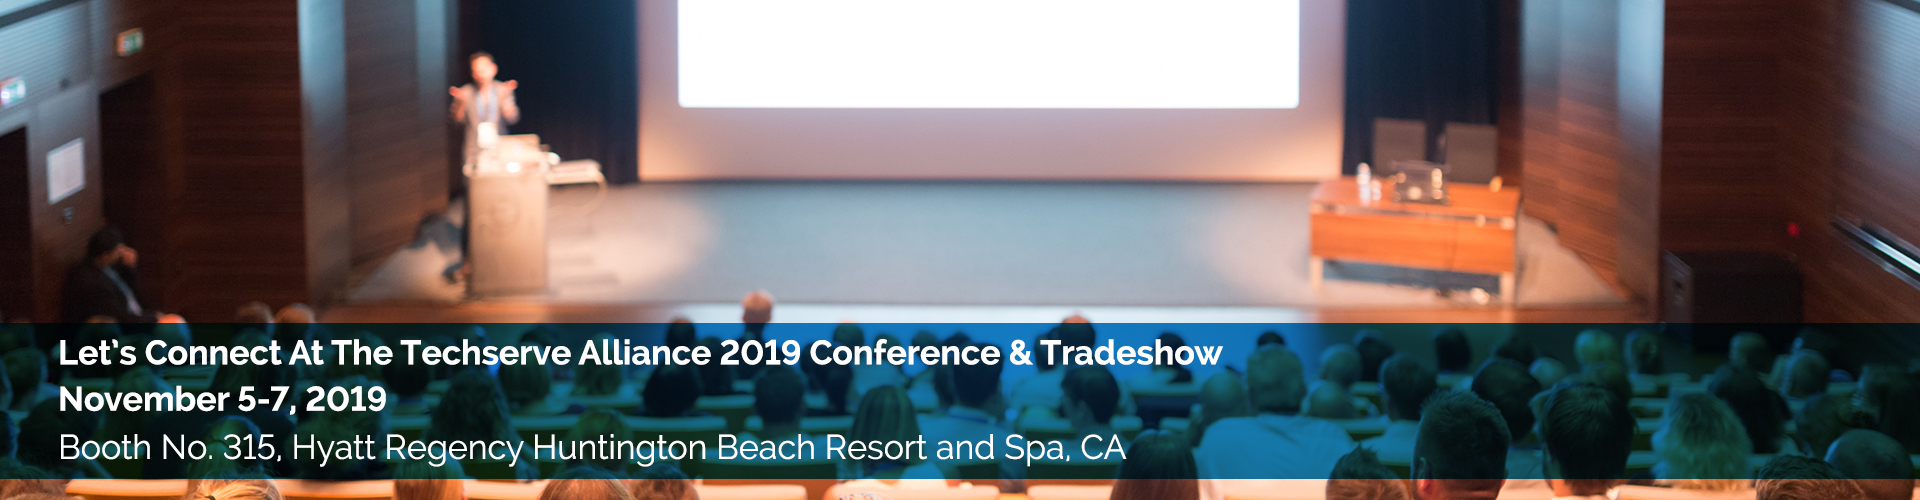 IMS People Possible at the Techserve Alliance 2019 Conference & Tradeshow